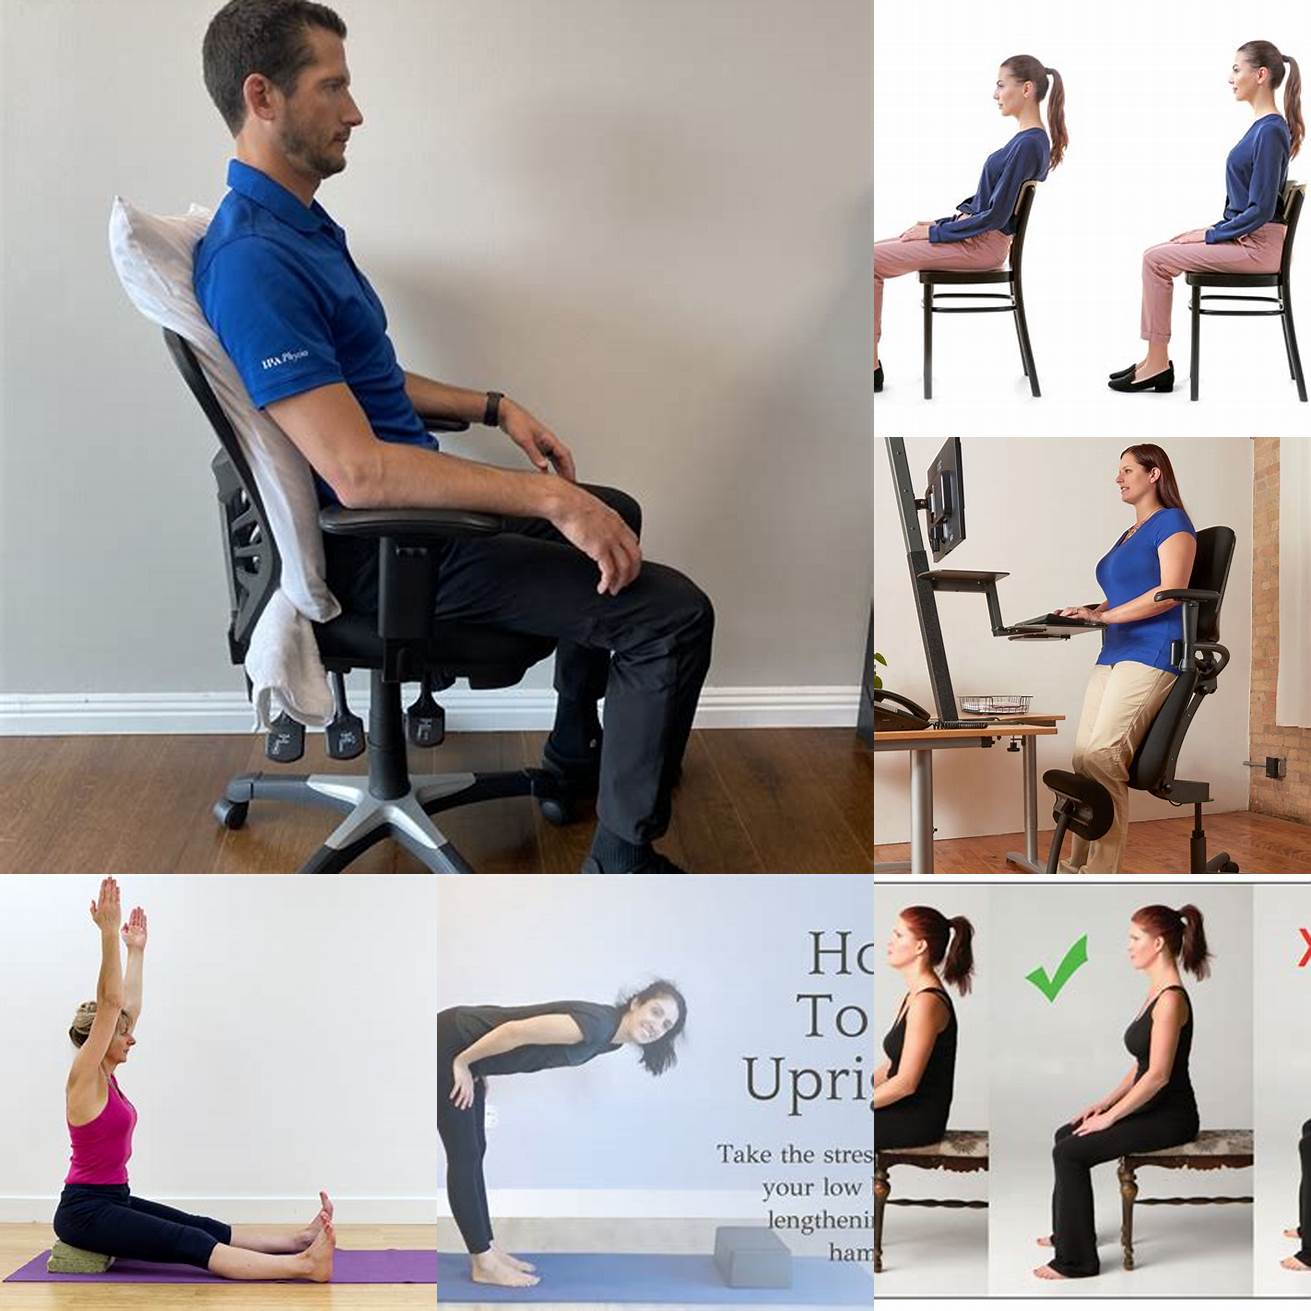 1 Comfort Instead of sitting upright for hours on end you can stretch out and lay completely flat